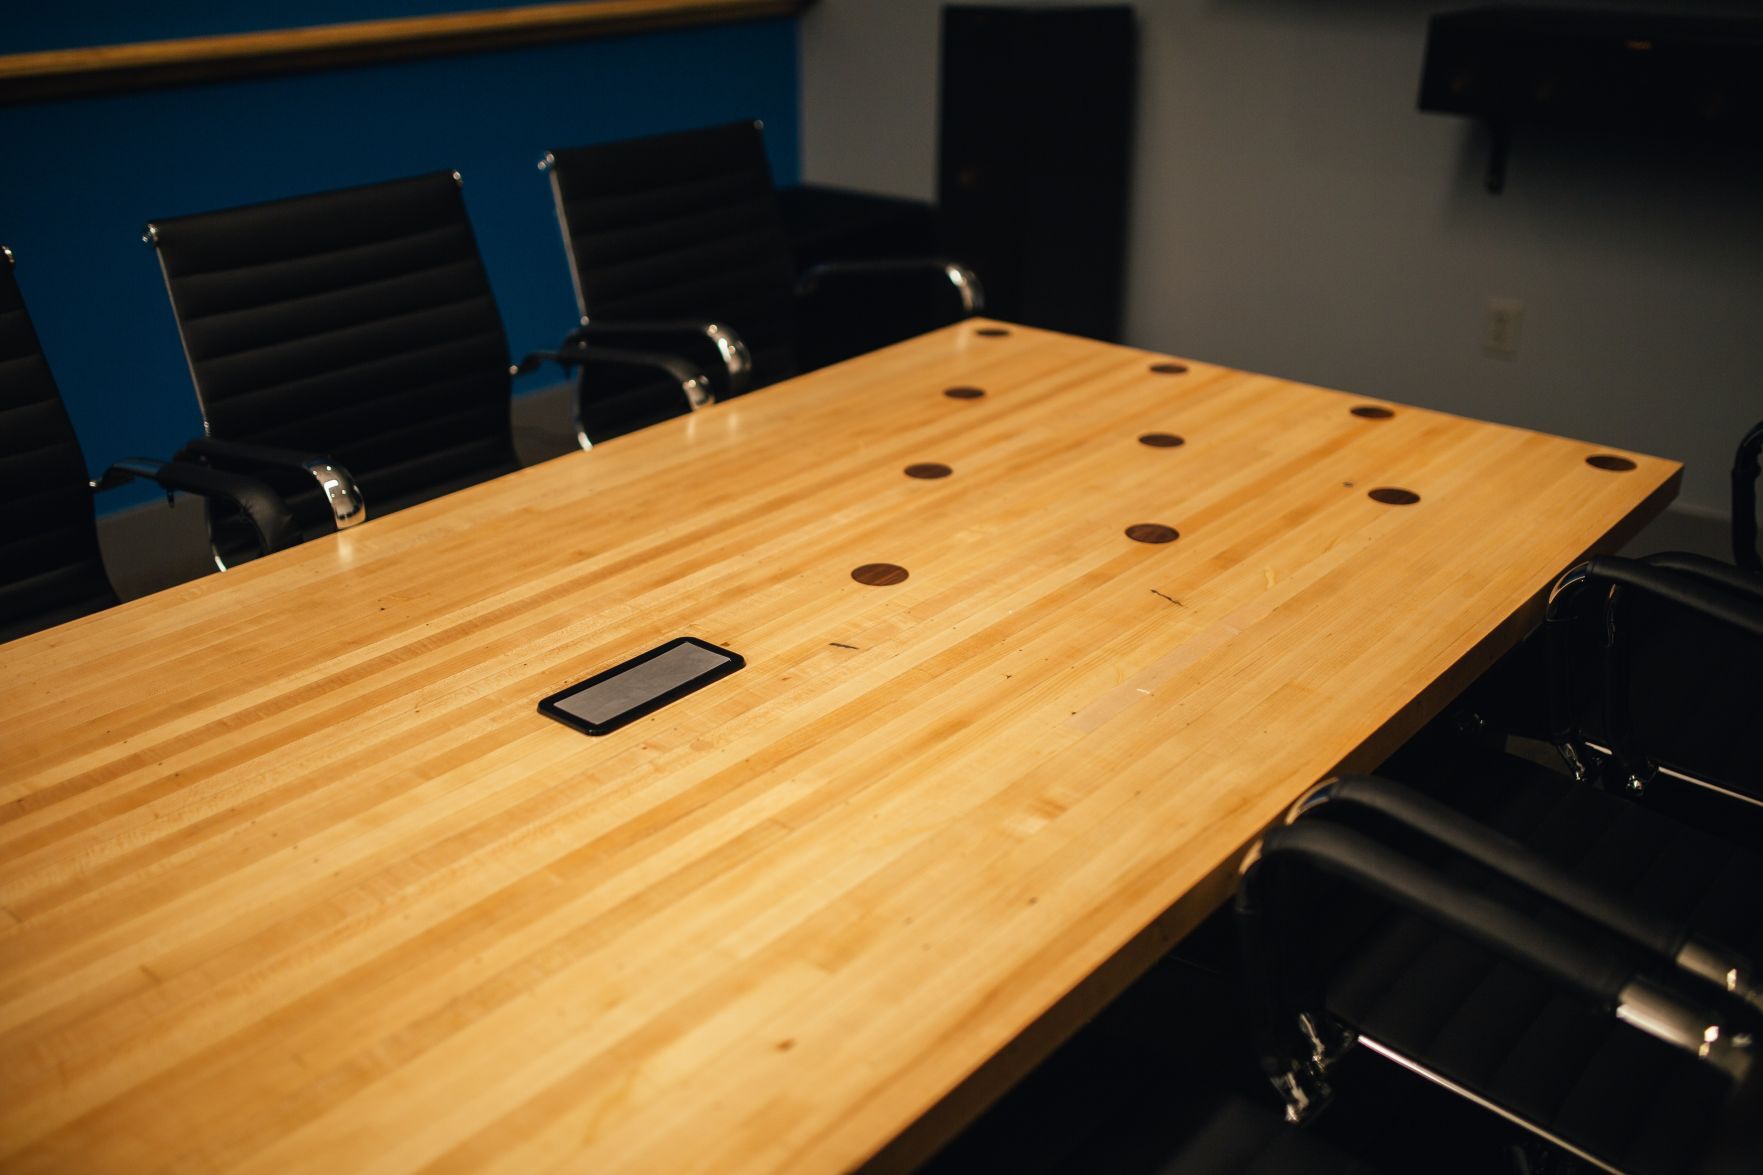 Examples of materials for which alternate uses have been found includes this table made from bowling alley wood, according to this photo from Repurposed Materials.  PHOTO CREDIT: Contributed